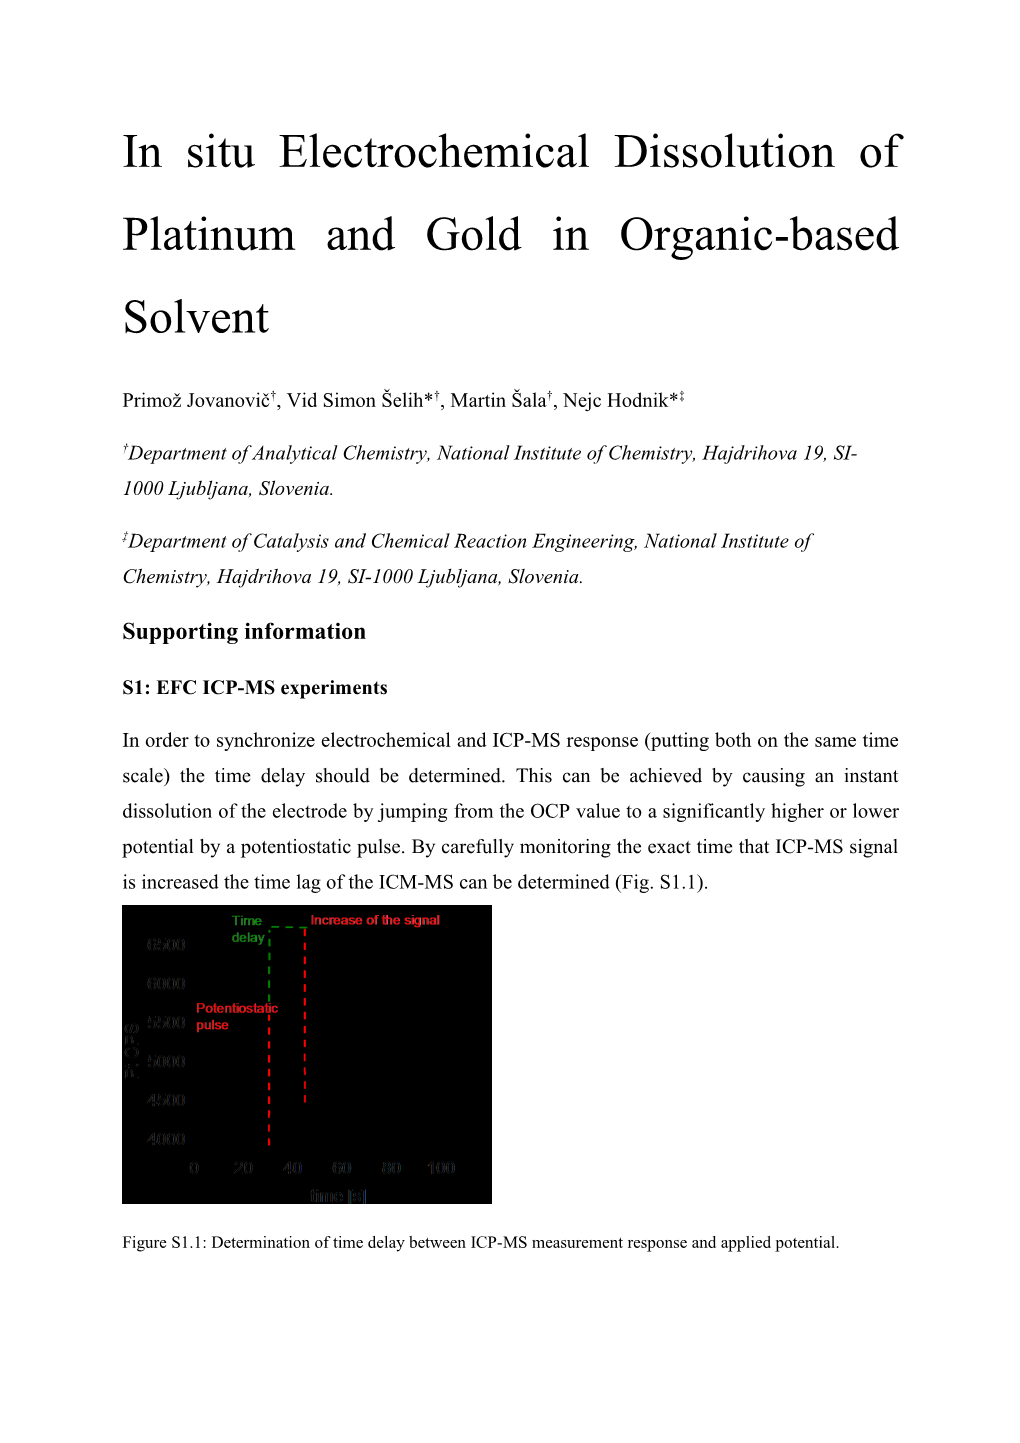 In Situ Electrochemical Dissolution of Platinum and Gold in Organic-Based Solvent